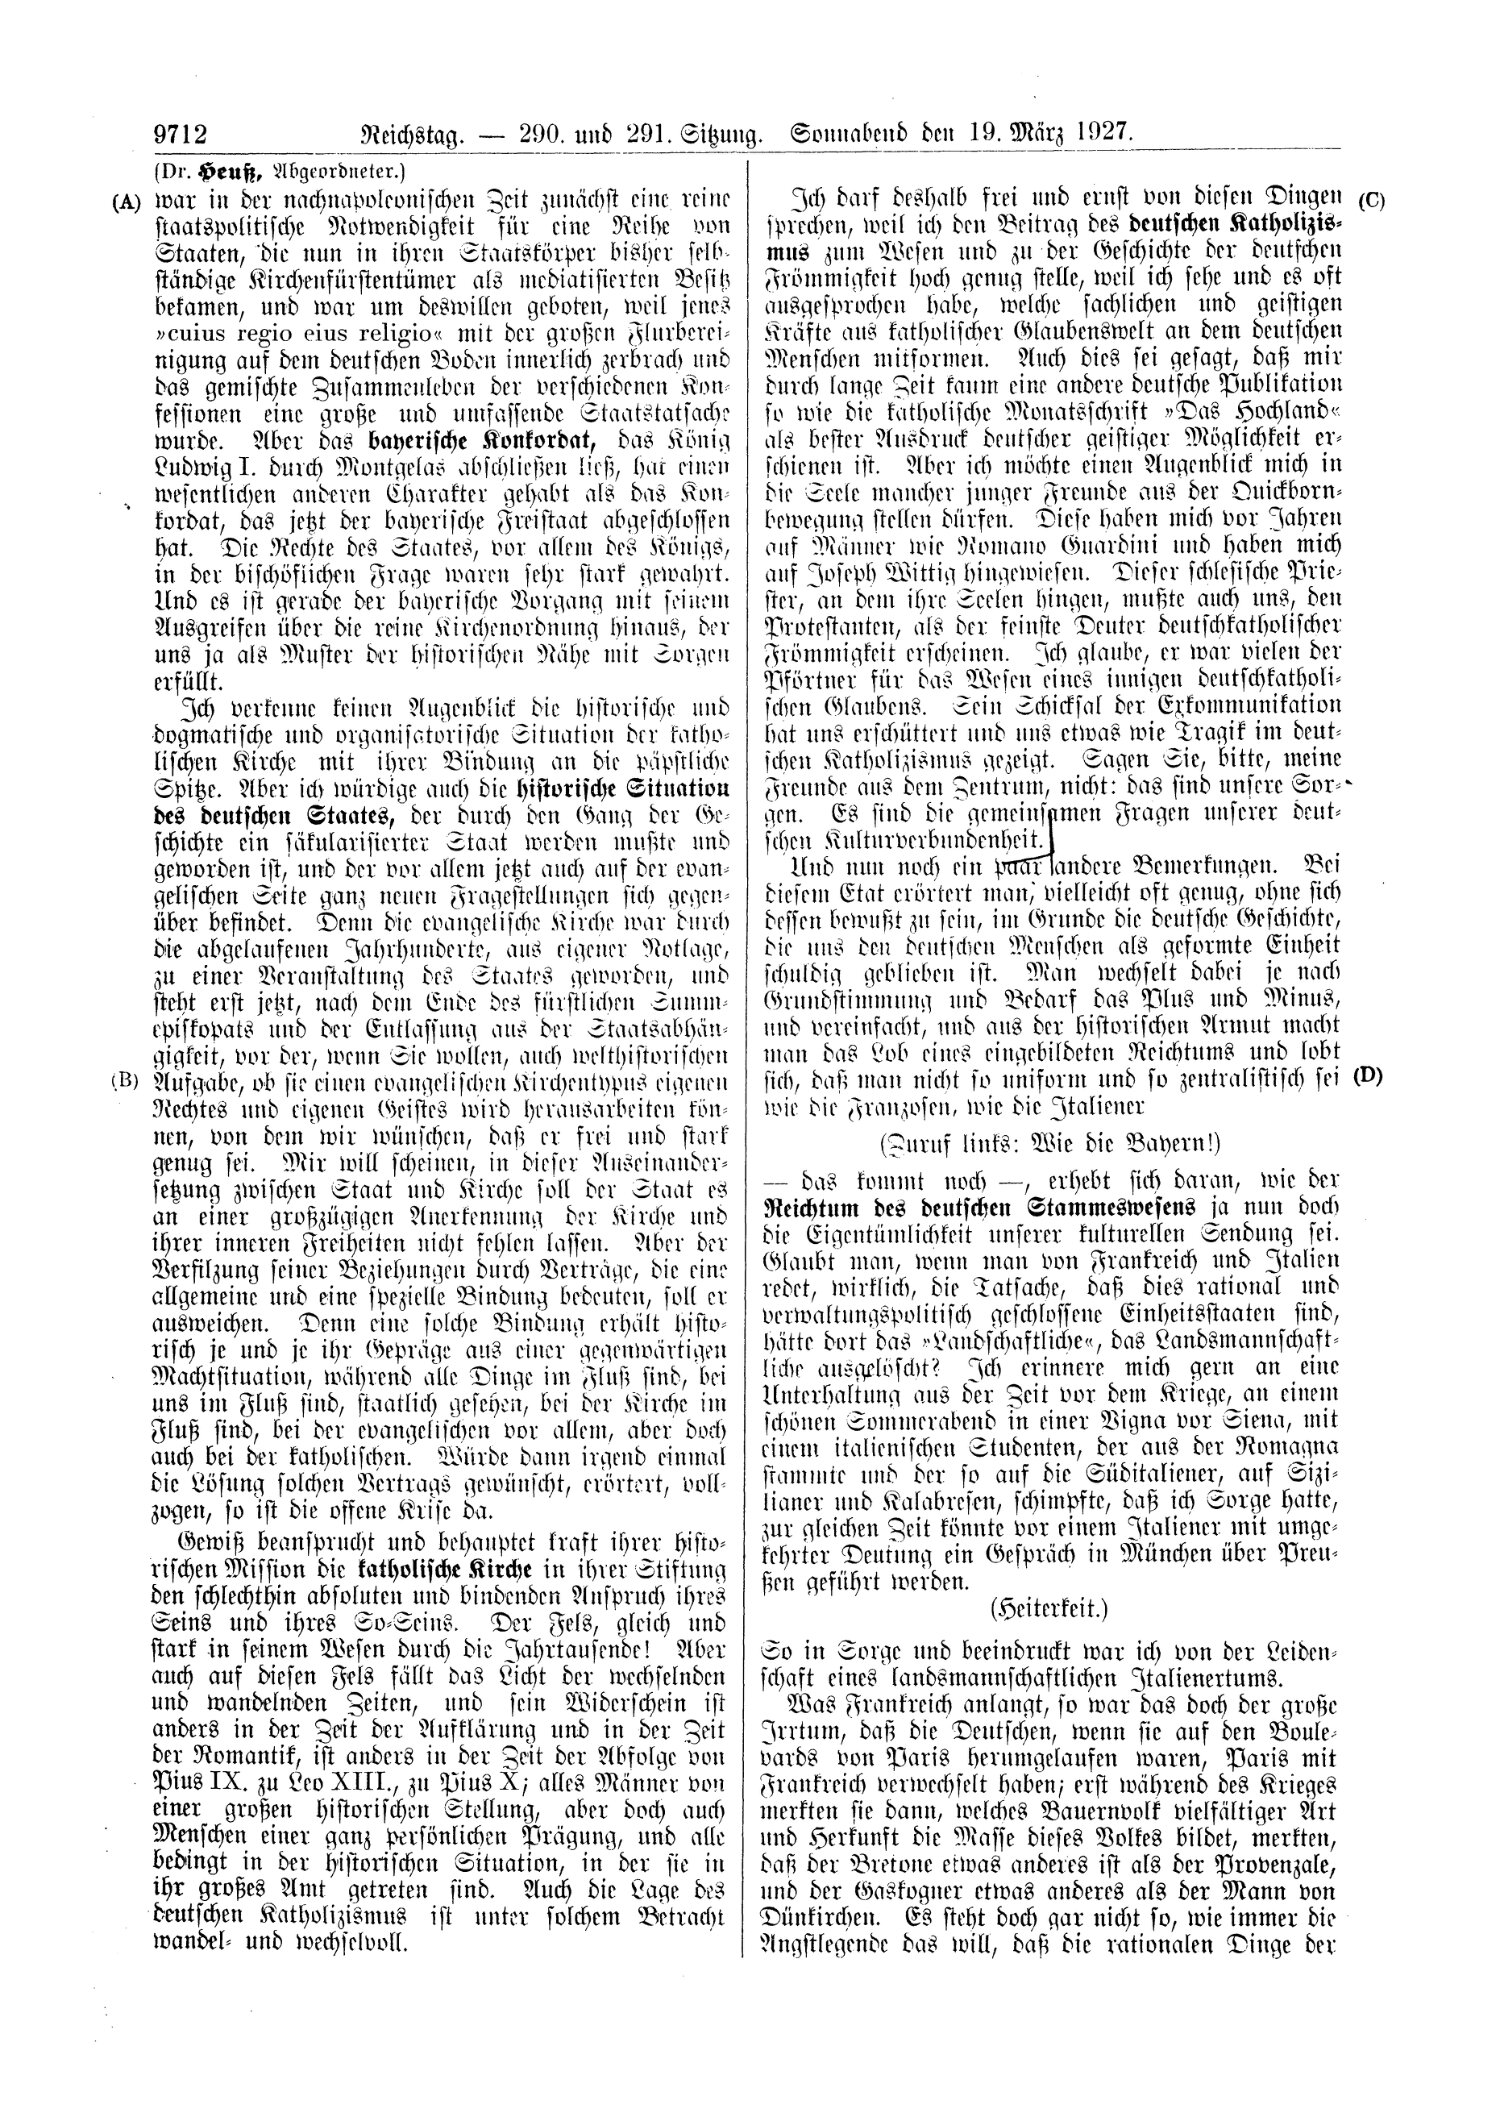 Scan of page 9712